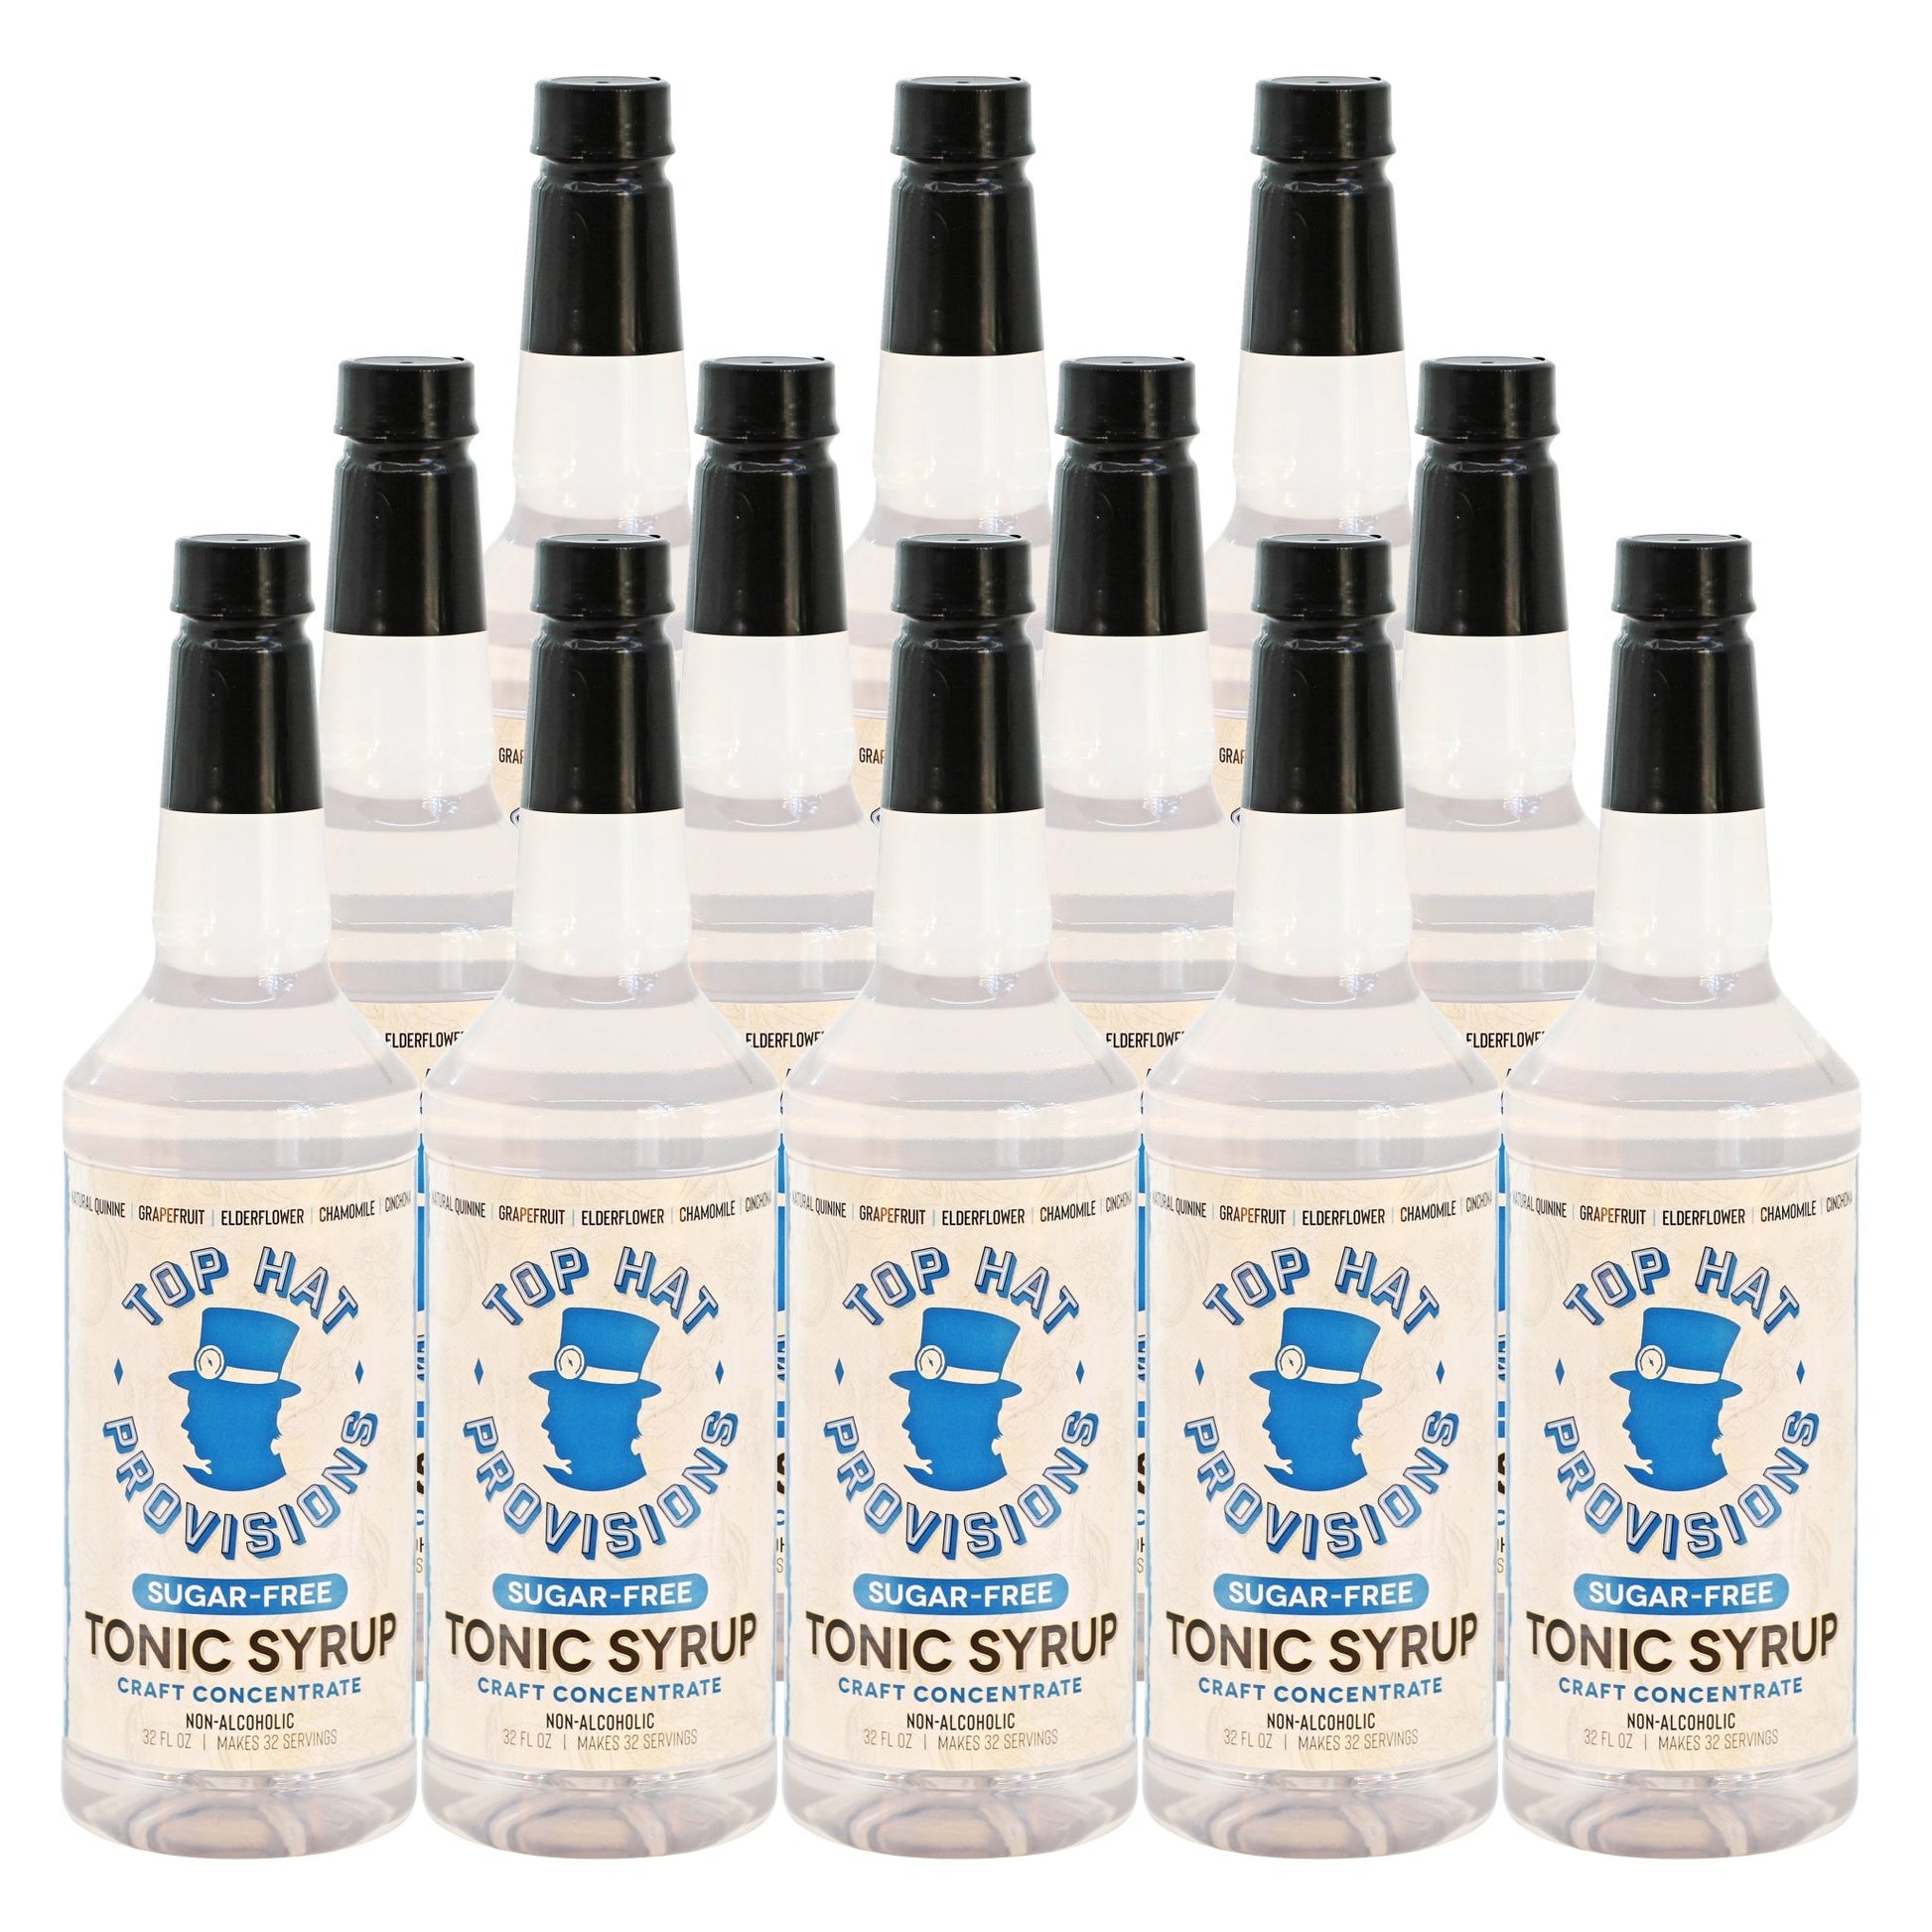 Top Hat Keto Sugar-Free Elderflower Tonic Syrup & 5x Quinine Concentrate - Naturally sweetened with keto friendly / carb free / zero sugar Monk Fruit - 32oz bottle - Groove Rabbit